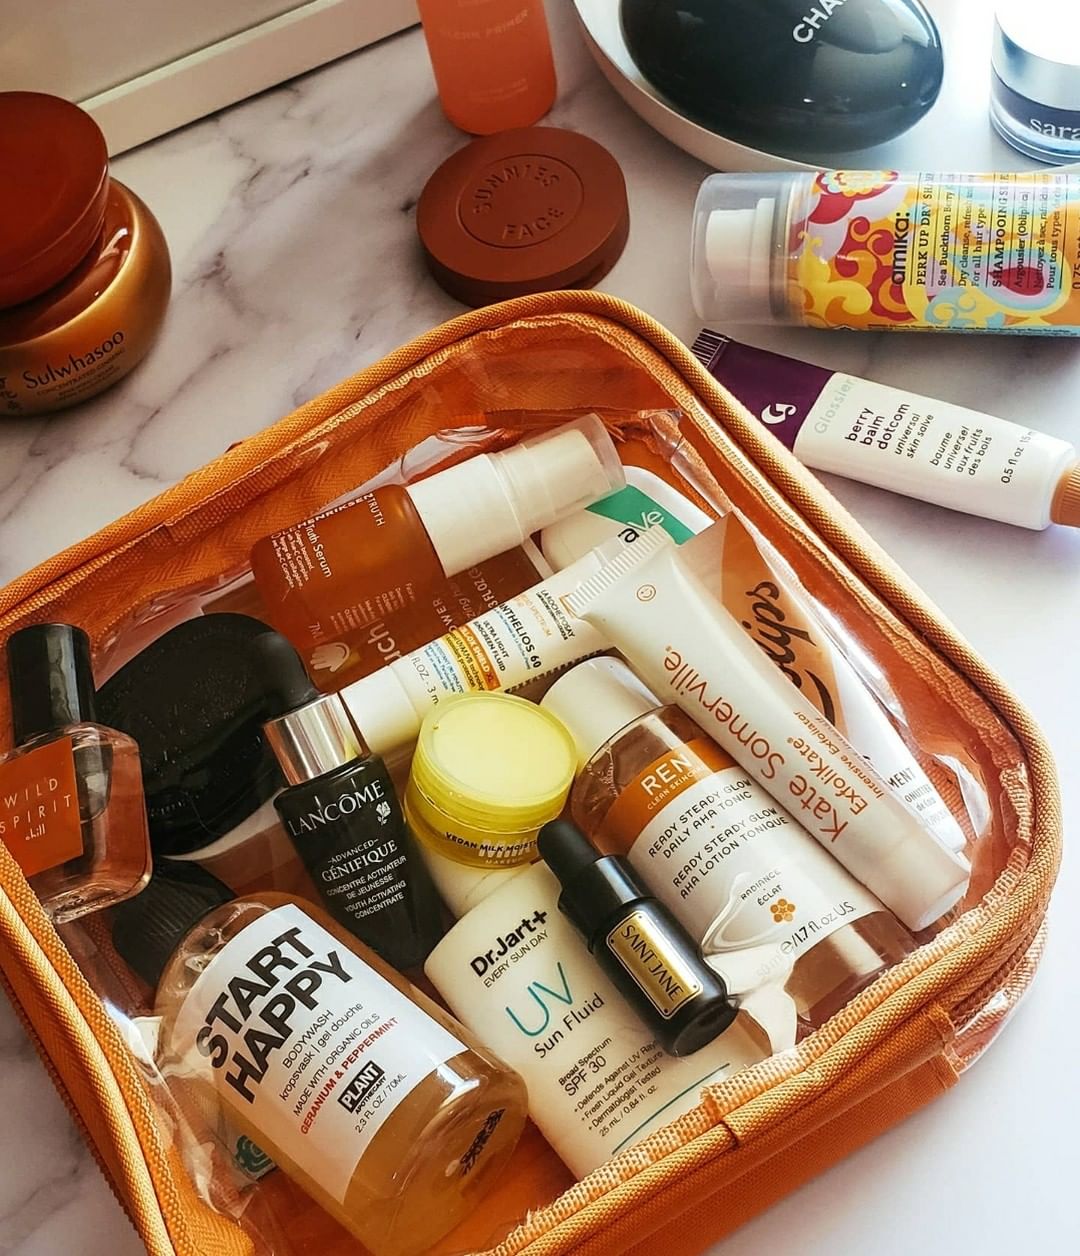 Travel size bottles packed in an orange TSA Approved Toiletry Bag